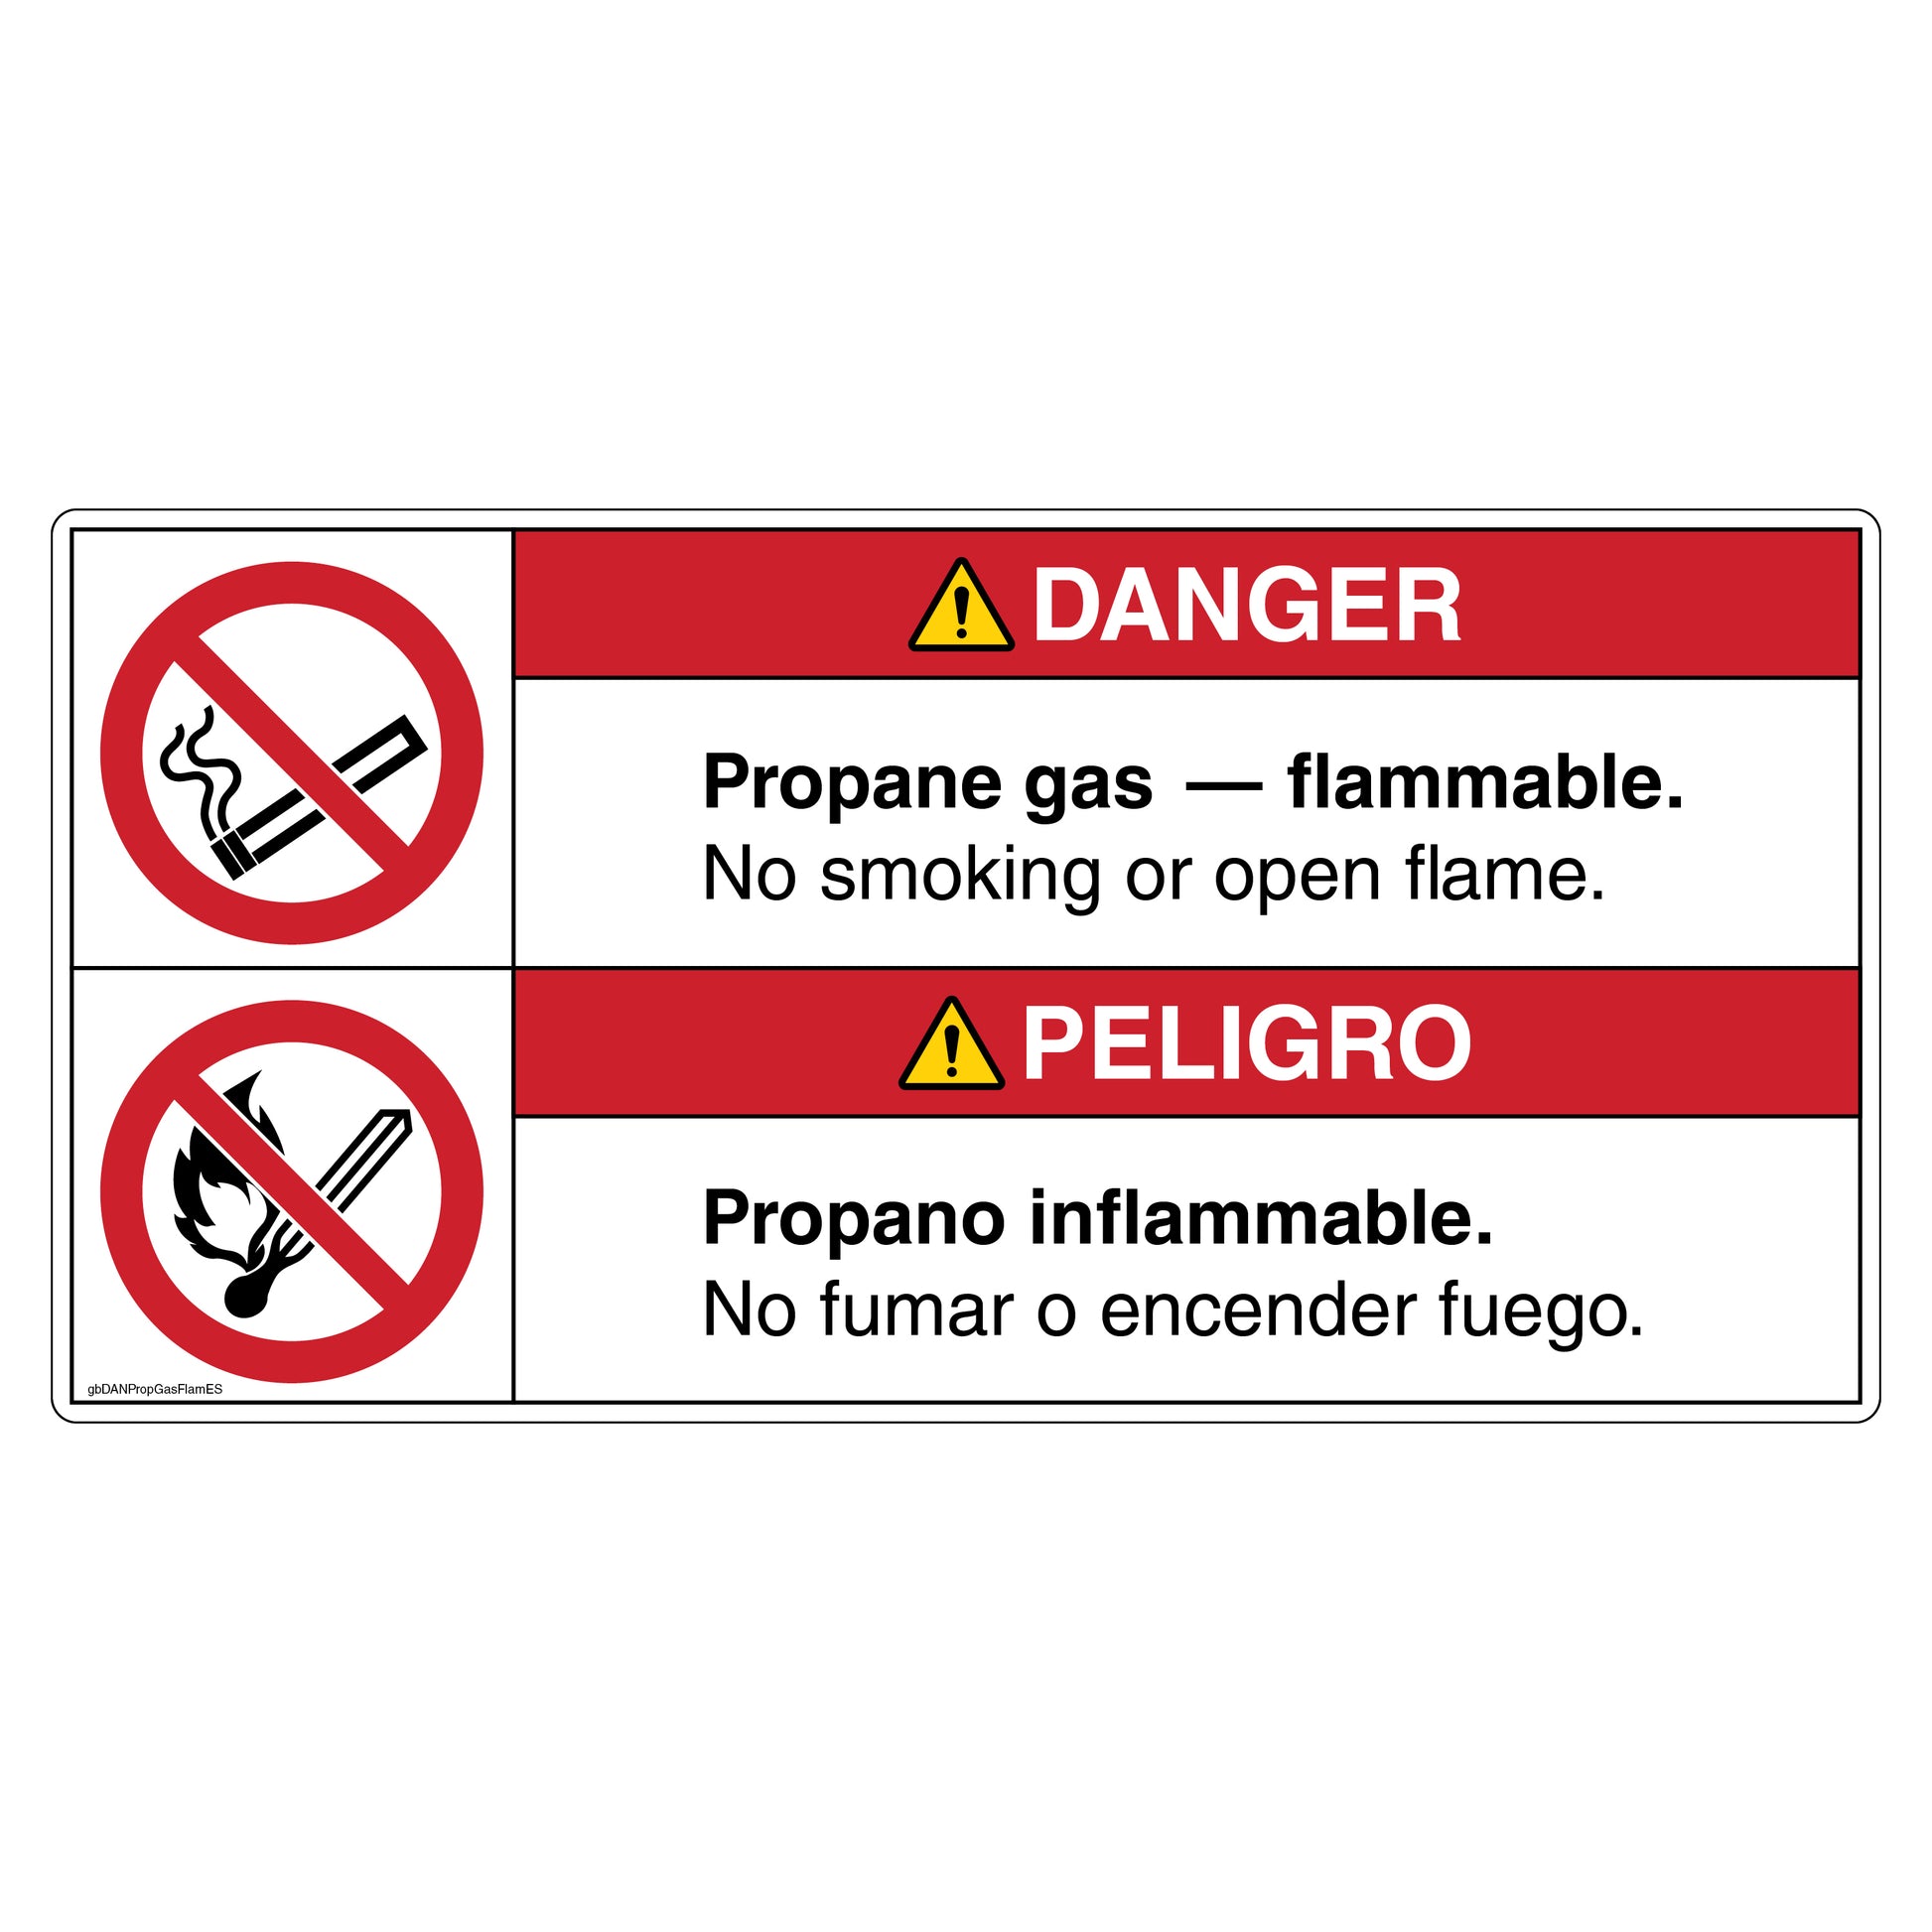 Danger Propane Gas Flammable No Smoking or Open Flame Decal in English and Spanish.